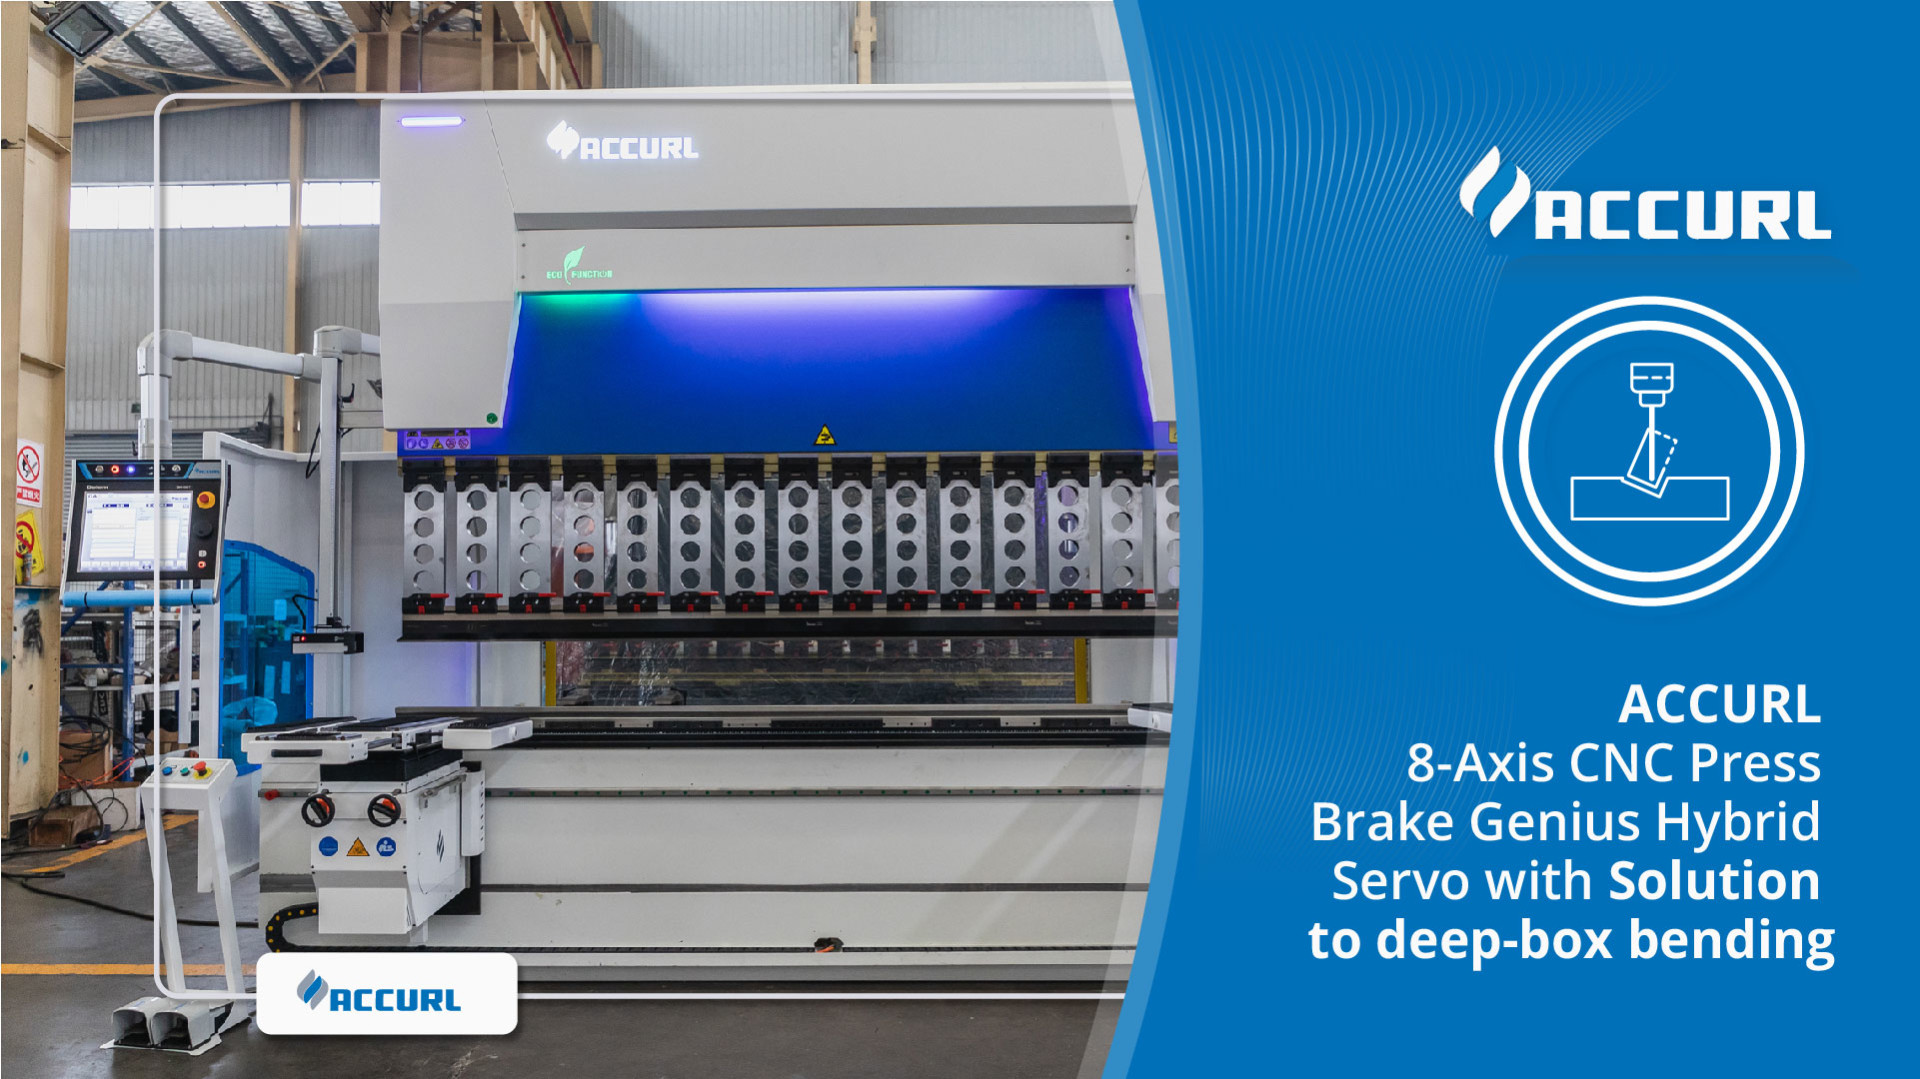 ACCURL 8-Axis CNC Press Brake Genius Hybrid Servo with Bending Solution to Deep-Box Forming